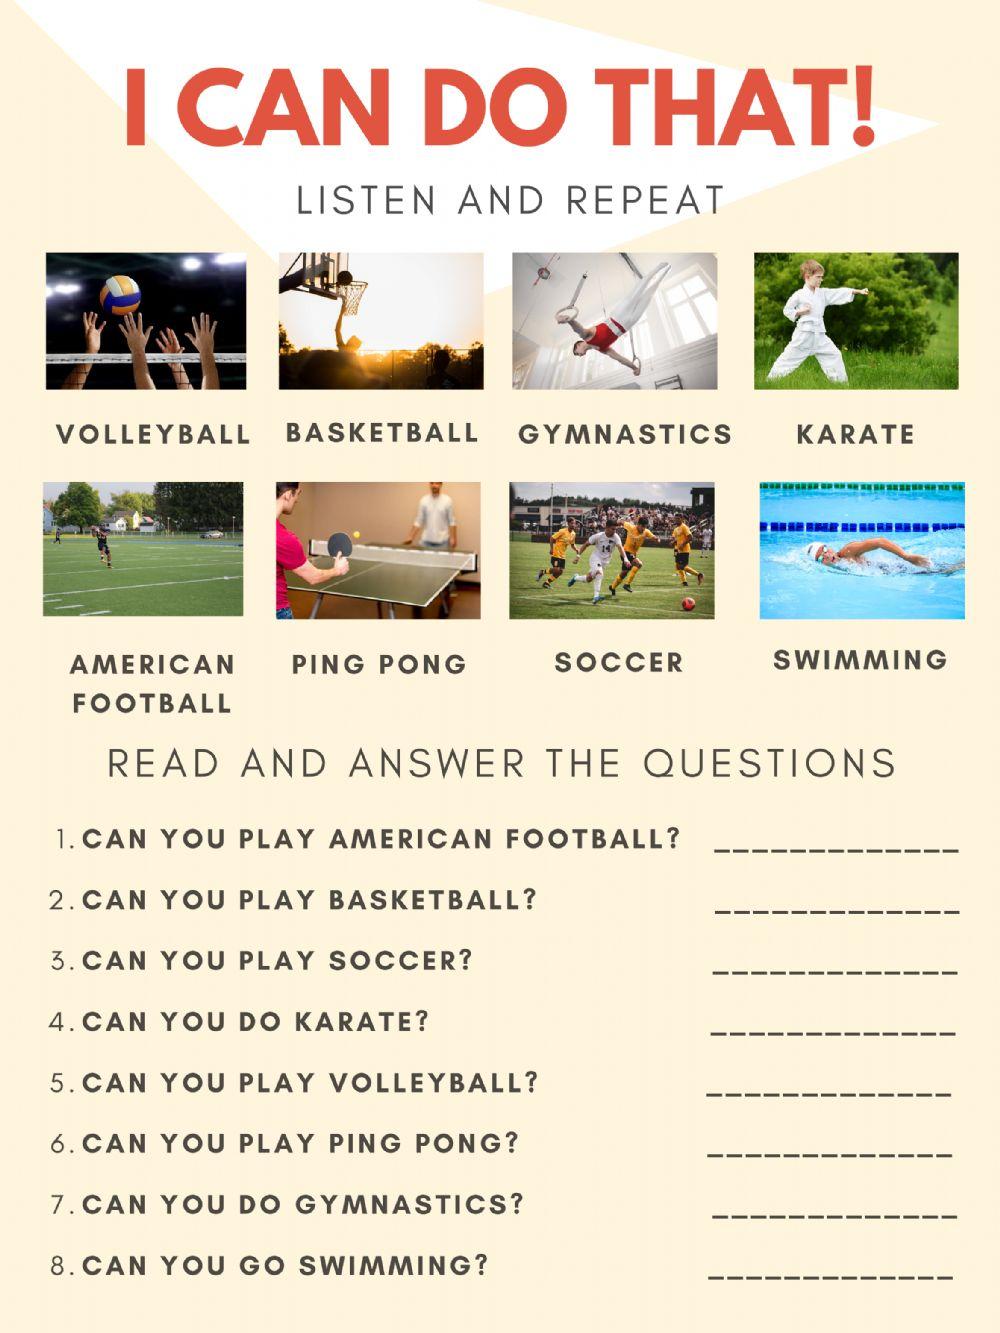 Can you? - Sports